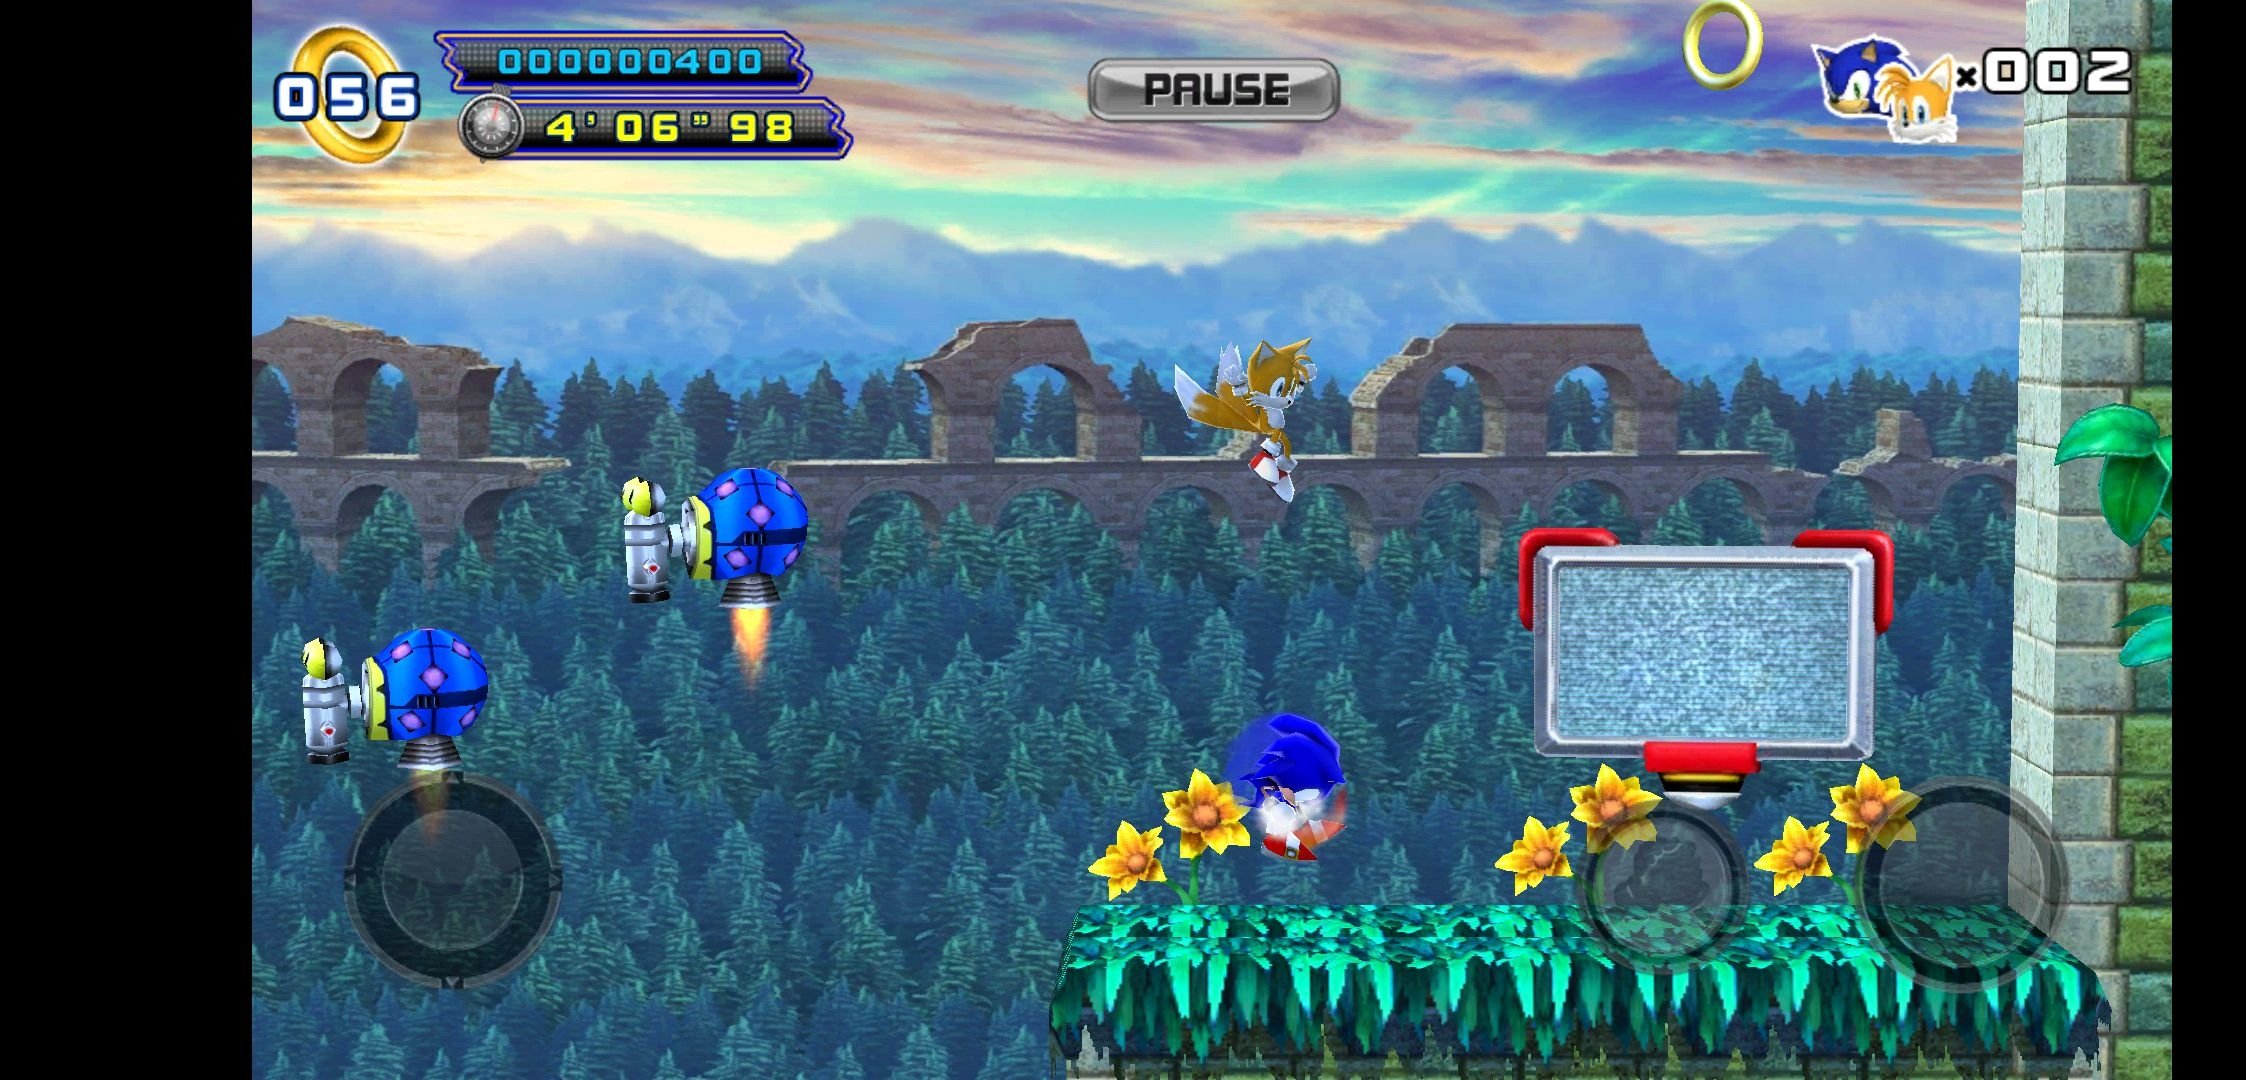 Sonic Classic APK (Android Game) - Free Download